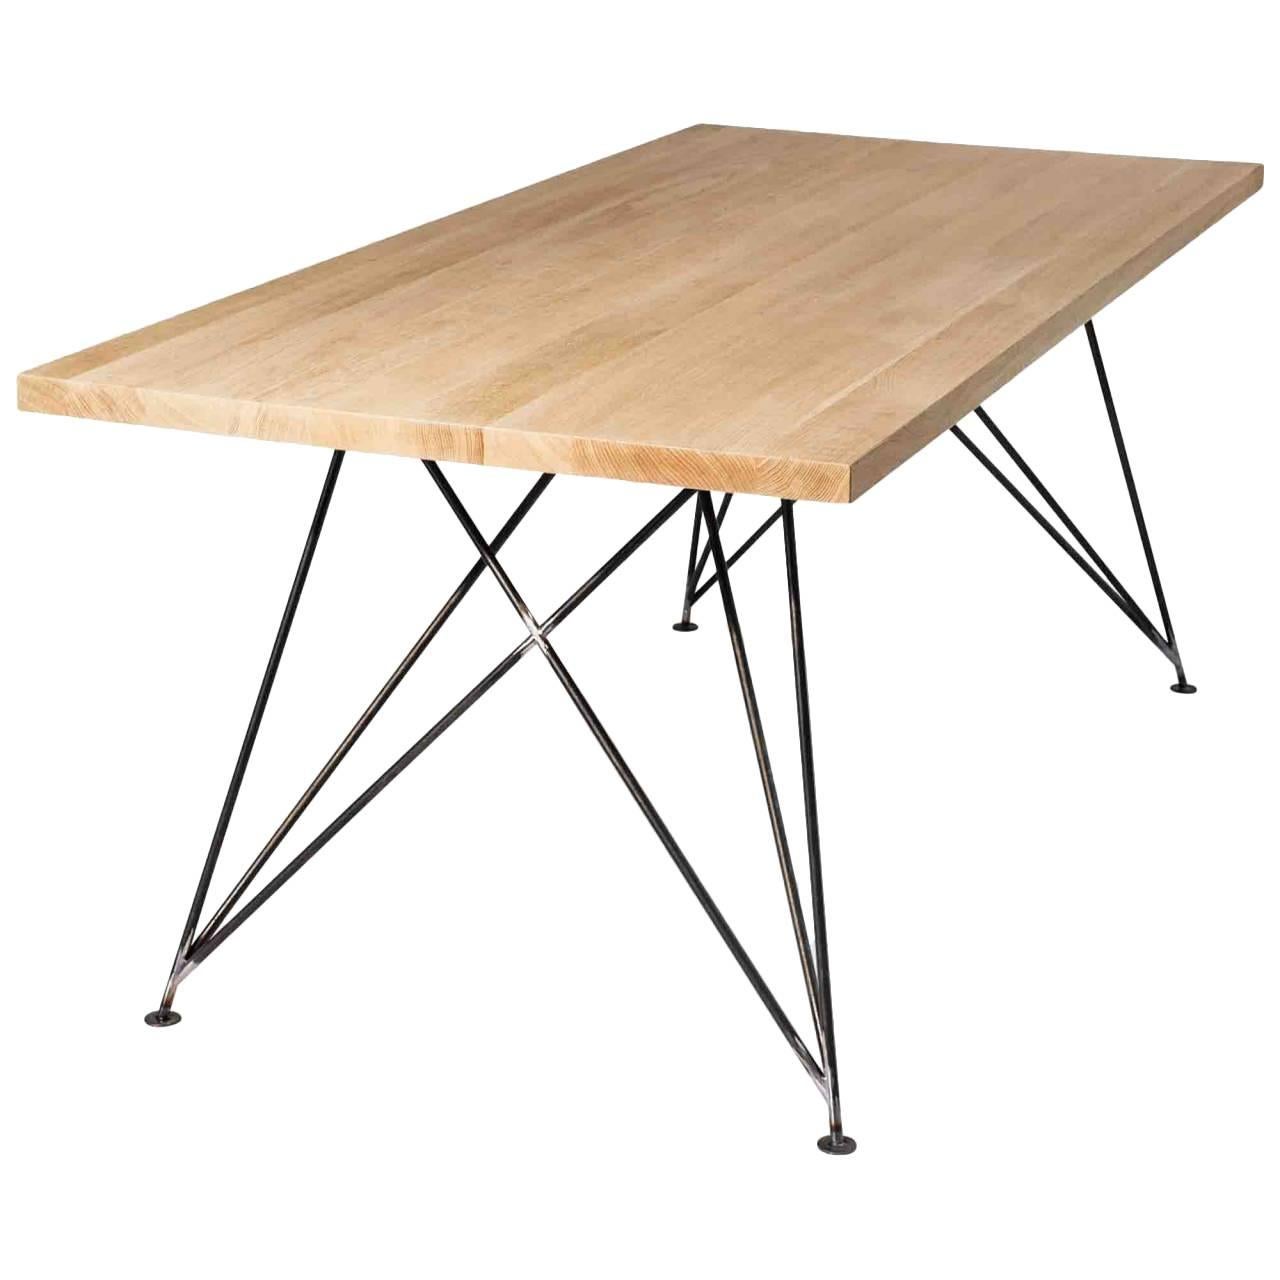 Dining Room Table "MC 02" by Manufacturer WUUD in Oak Wood and Steel (250 cm) For Sale